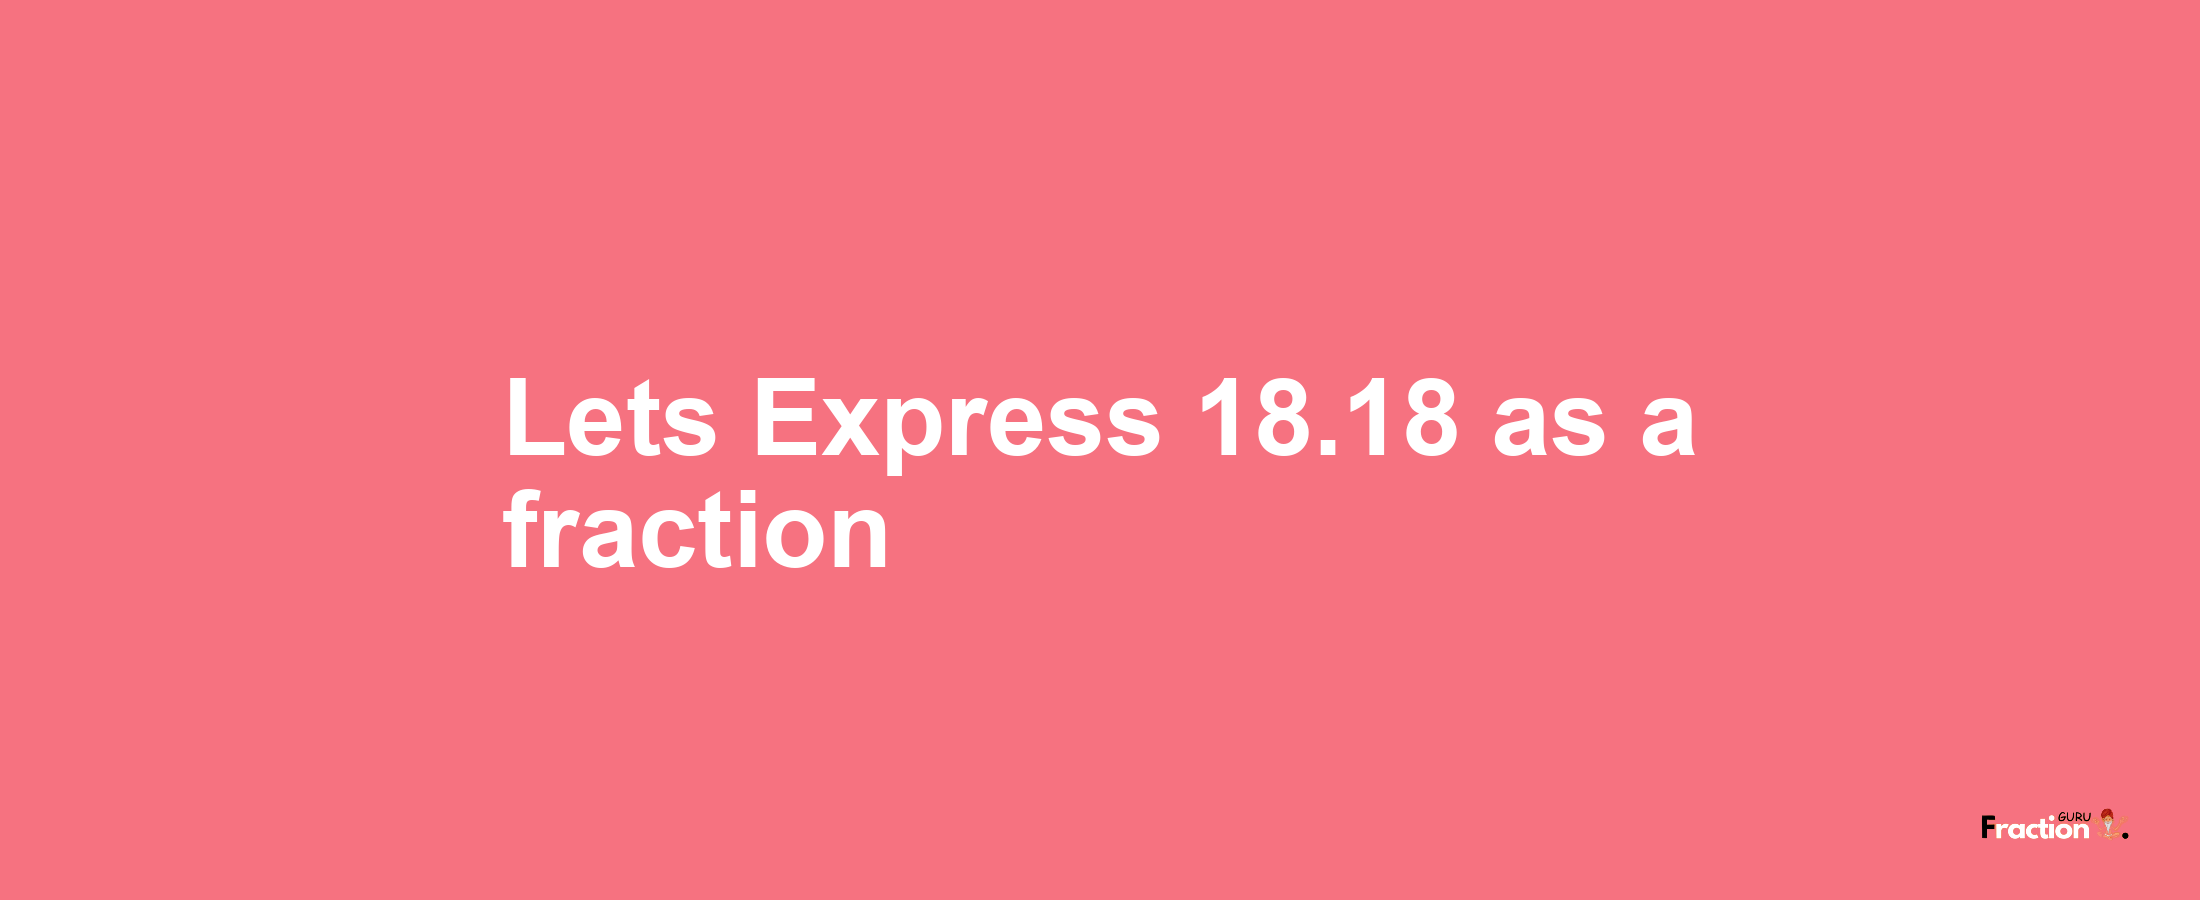 Lets Express 18.18 as afraction